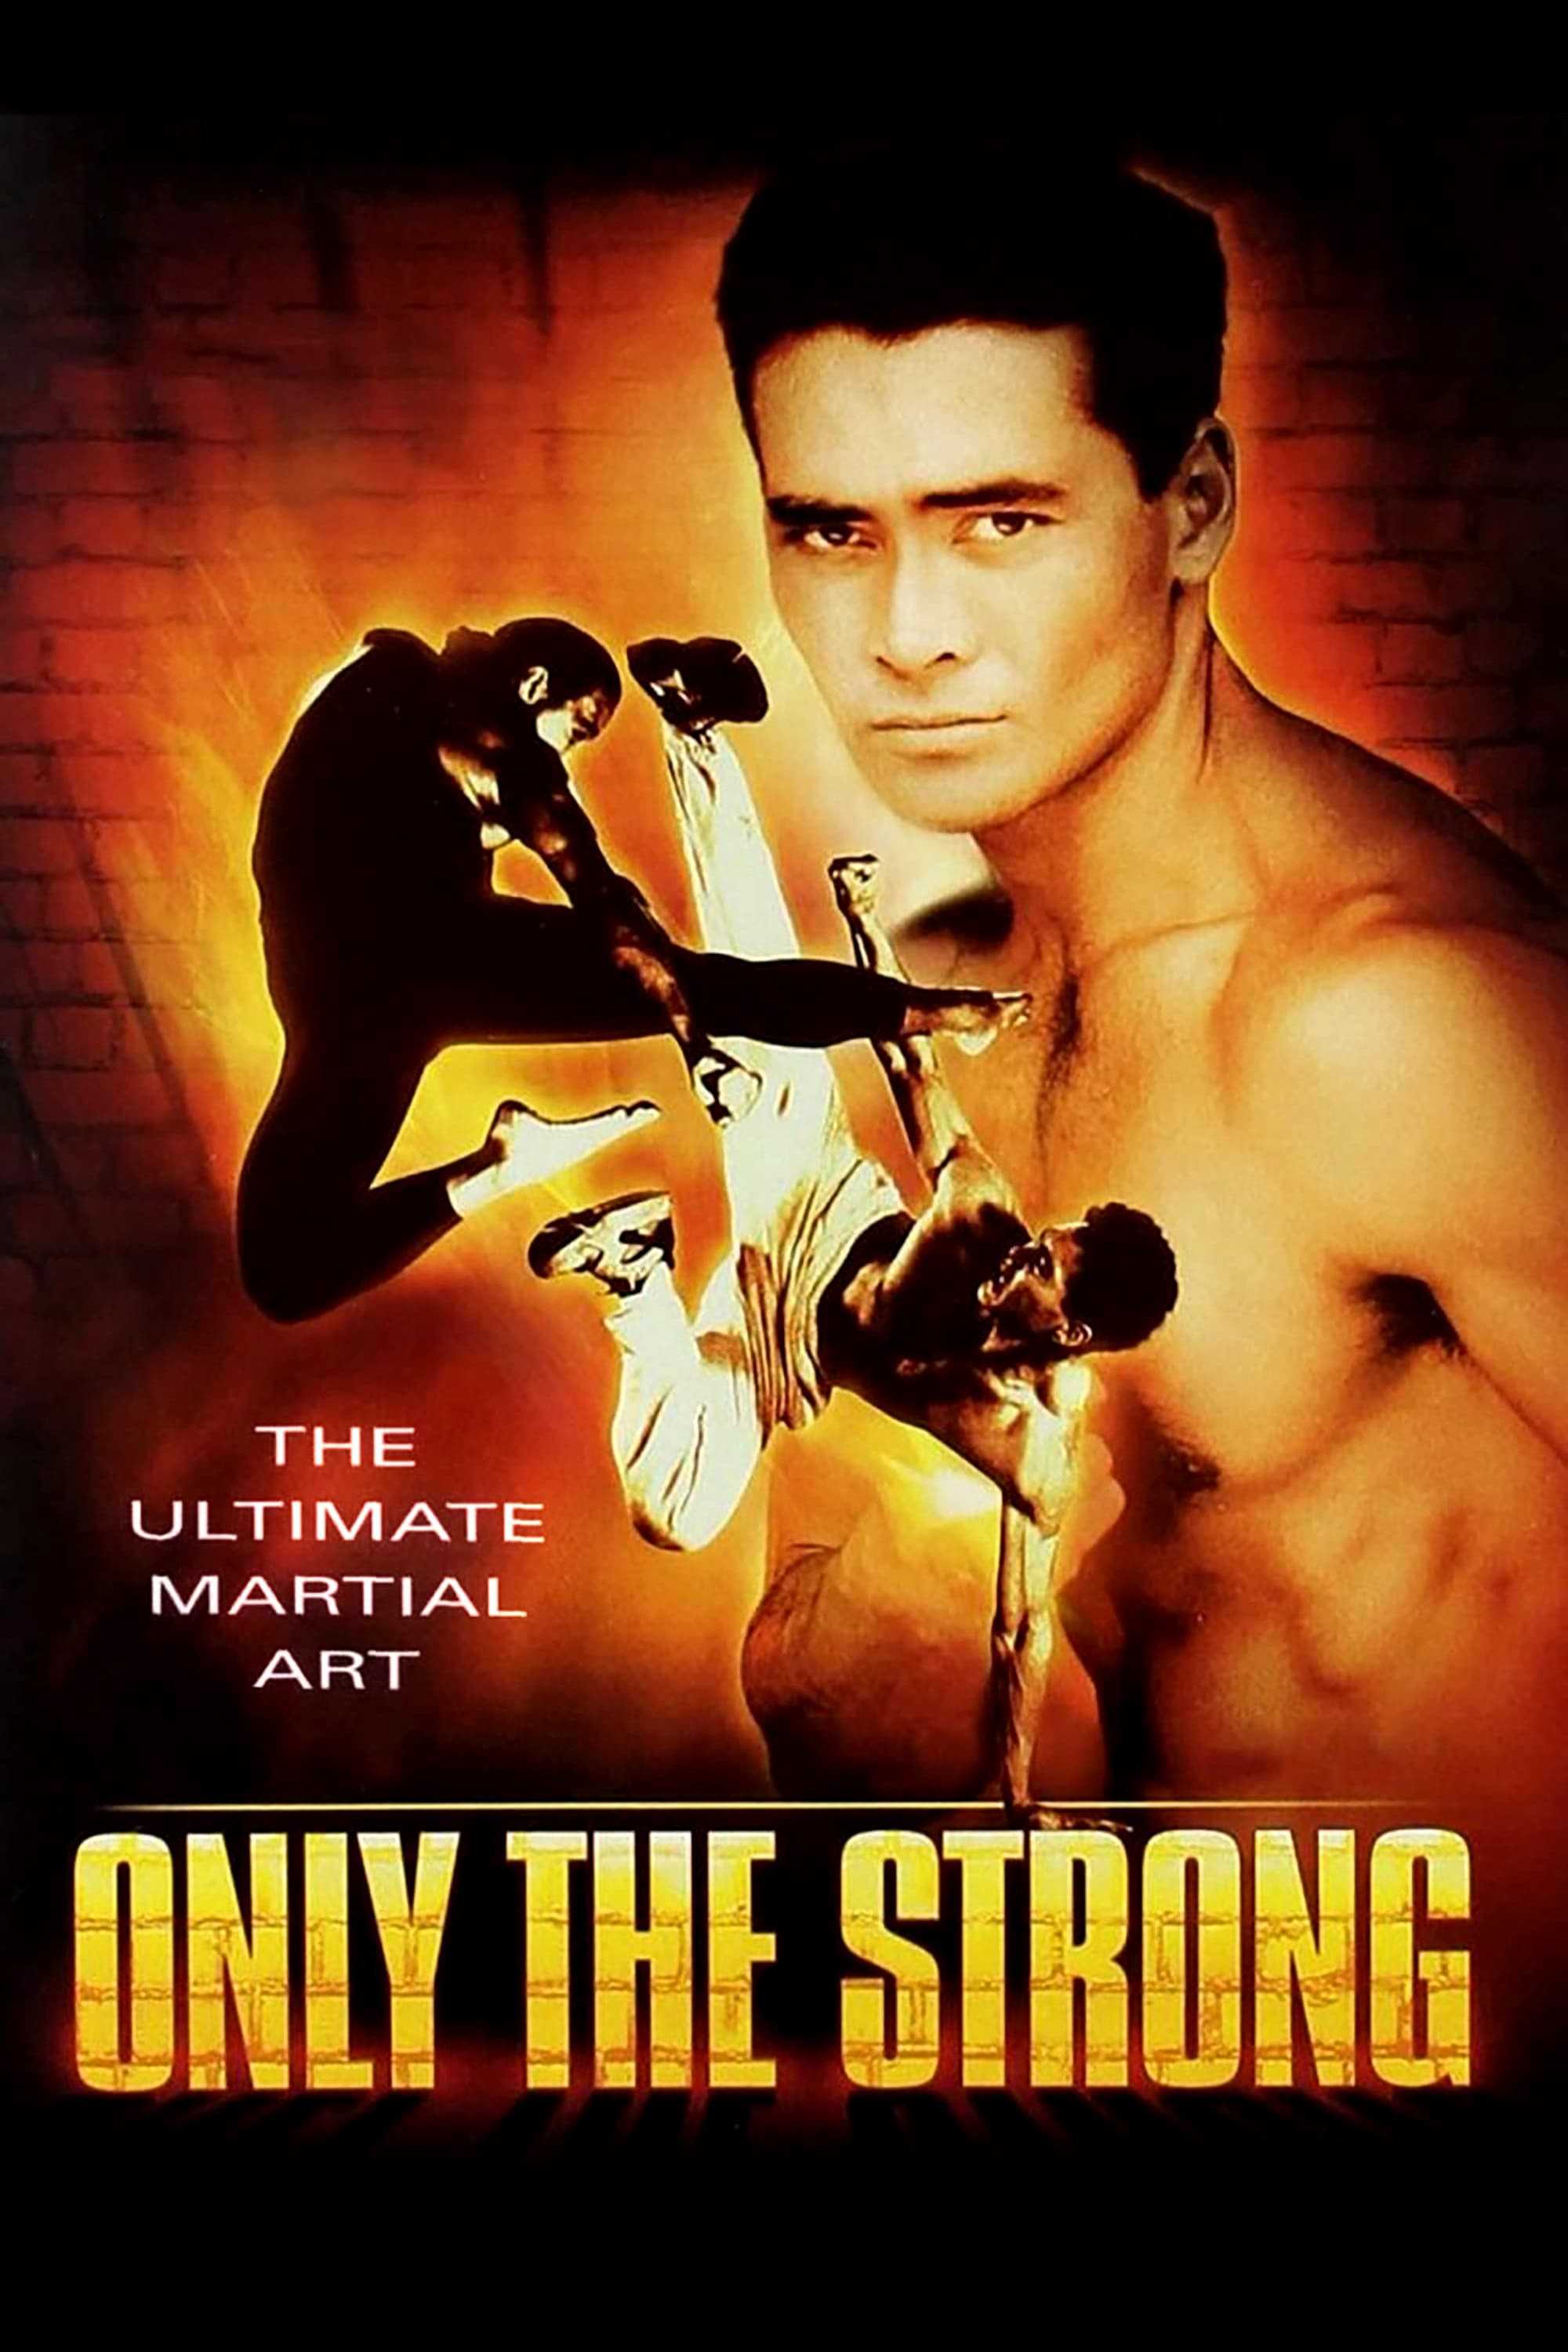 Only the strong - Only the strong